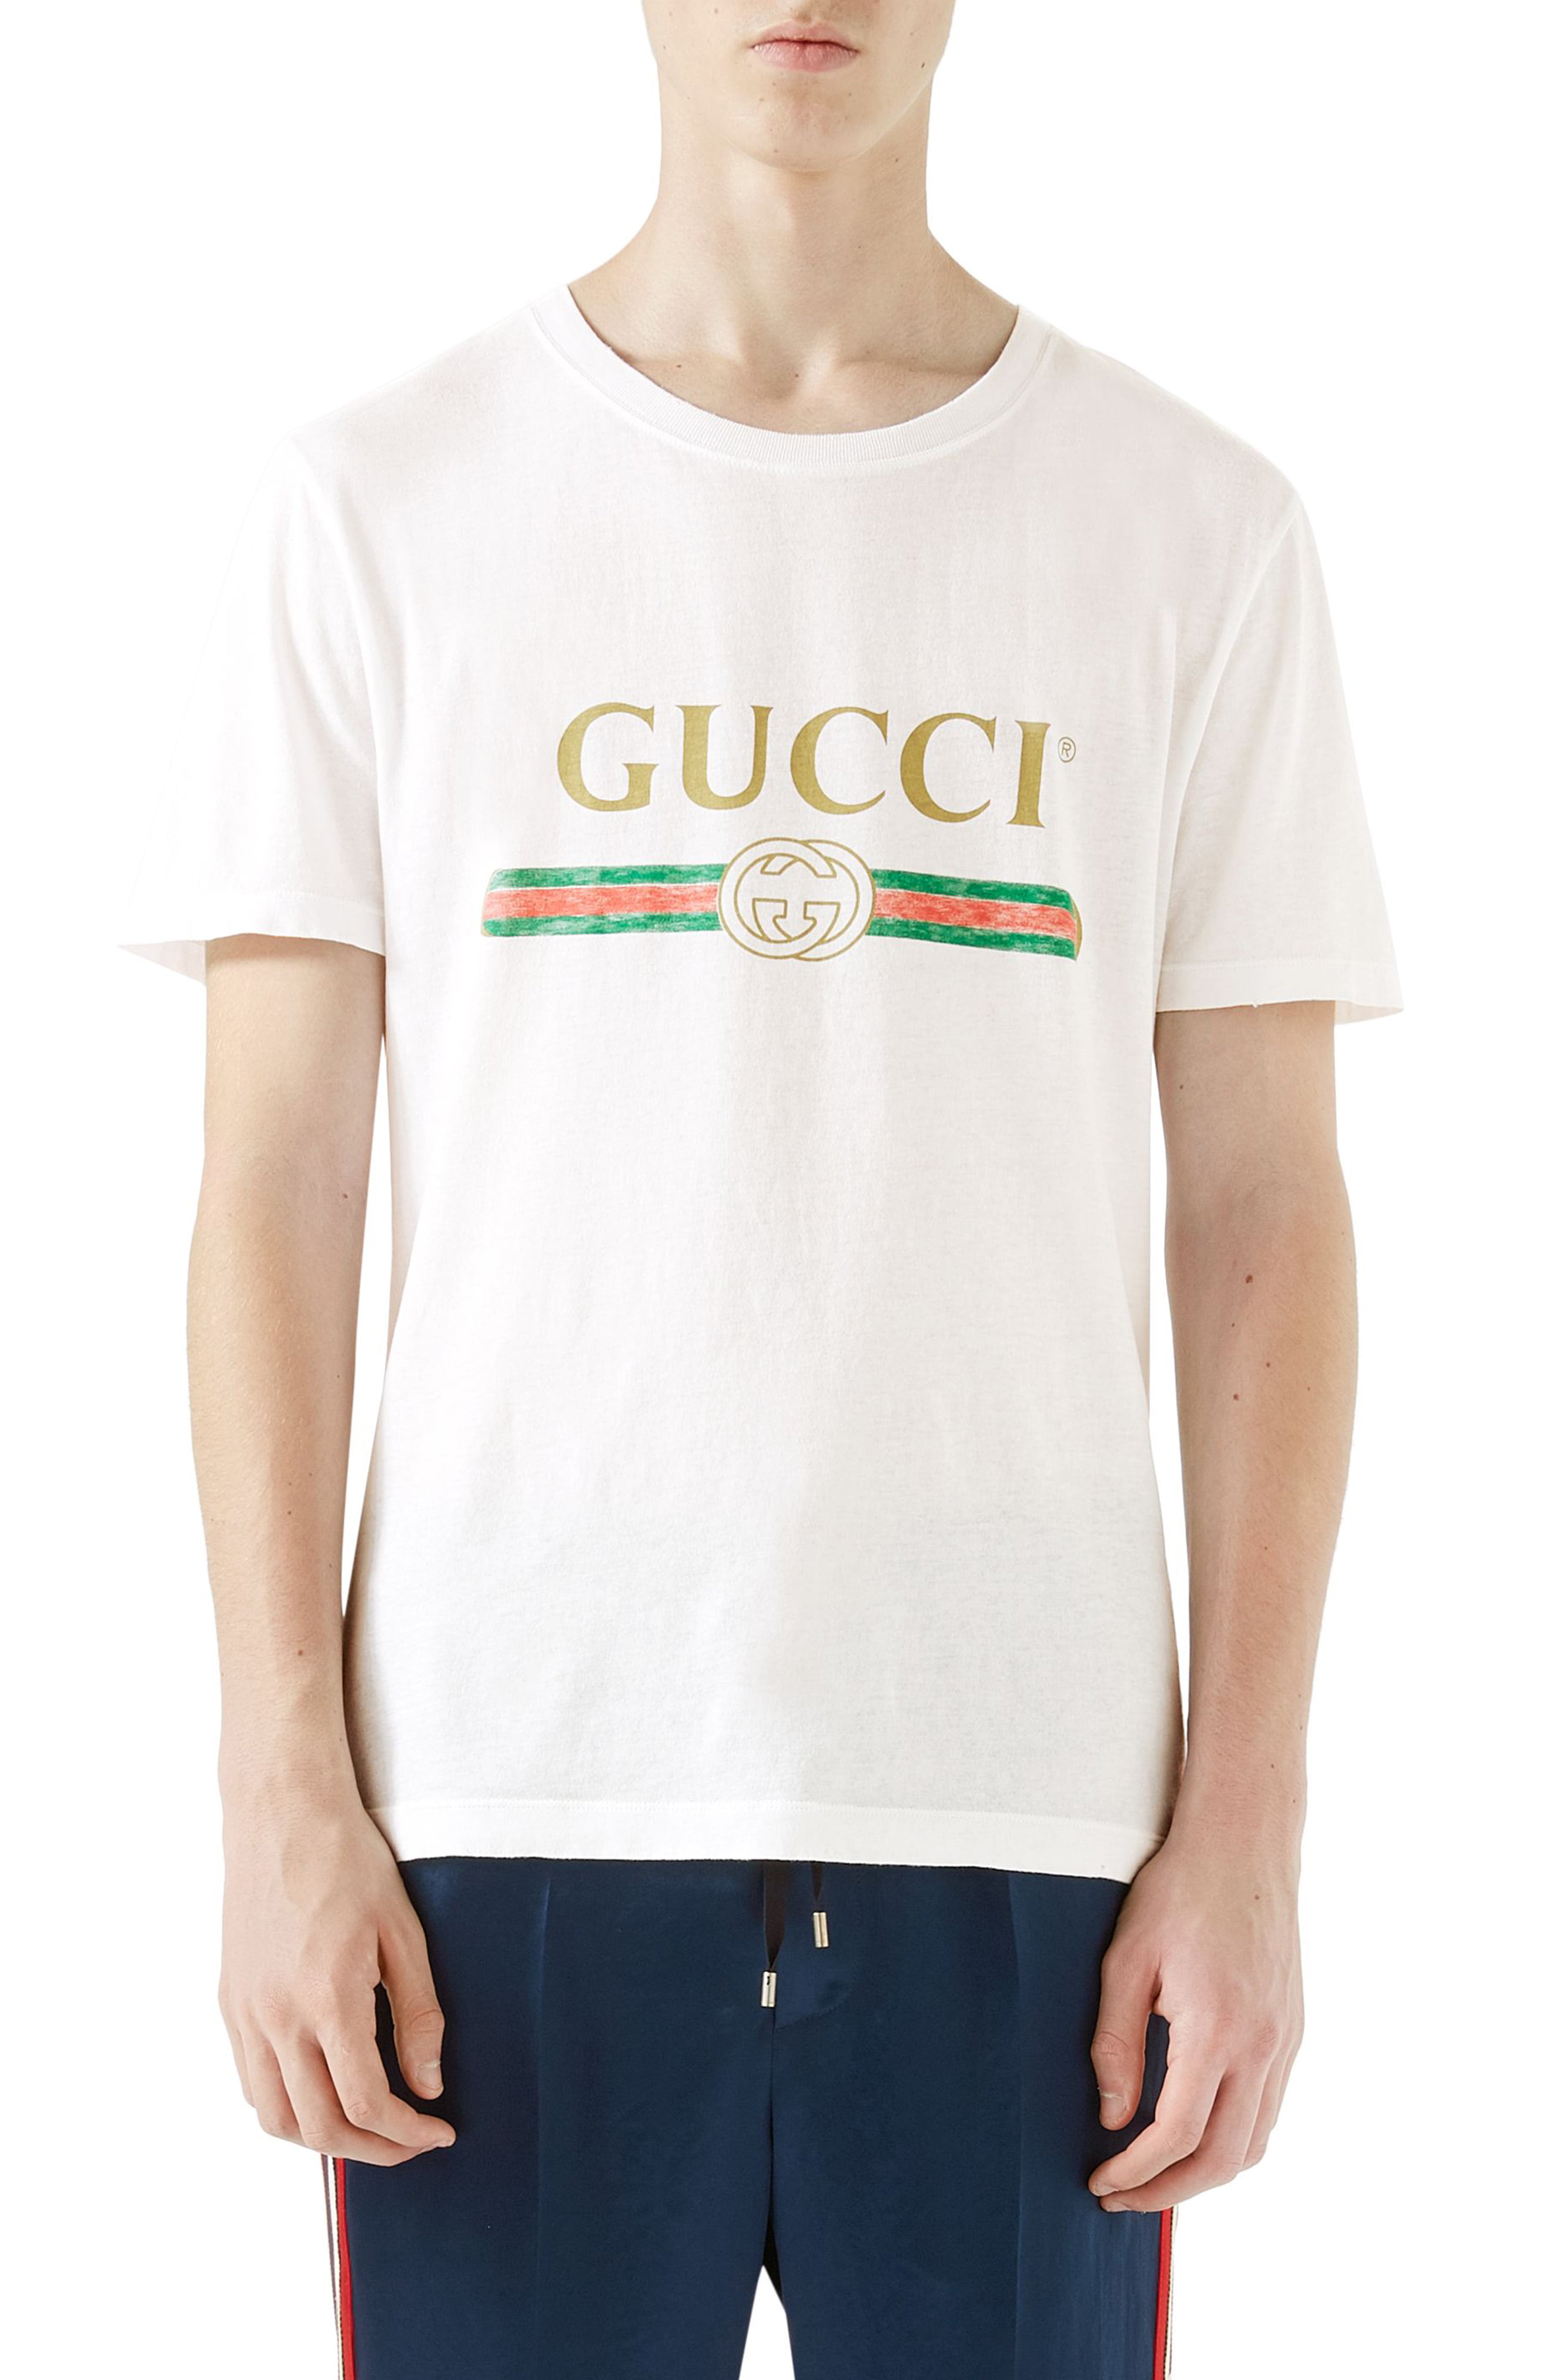 price of gucci clothes